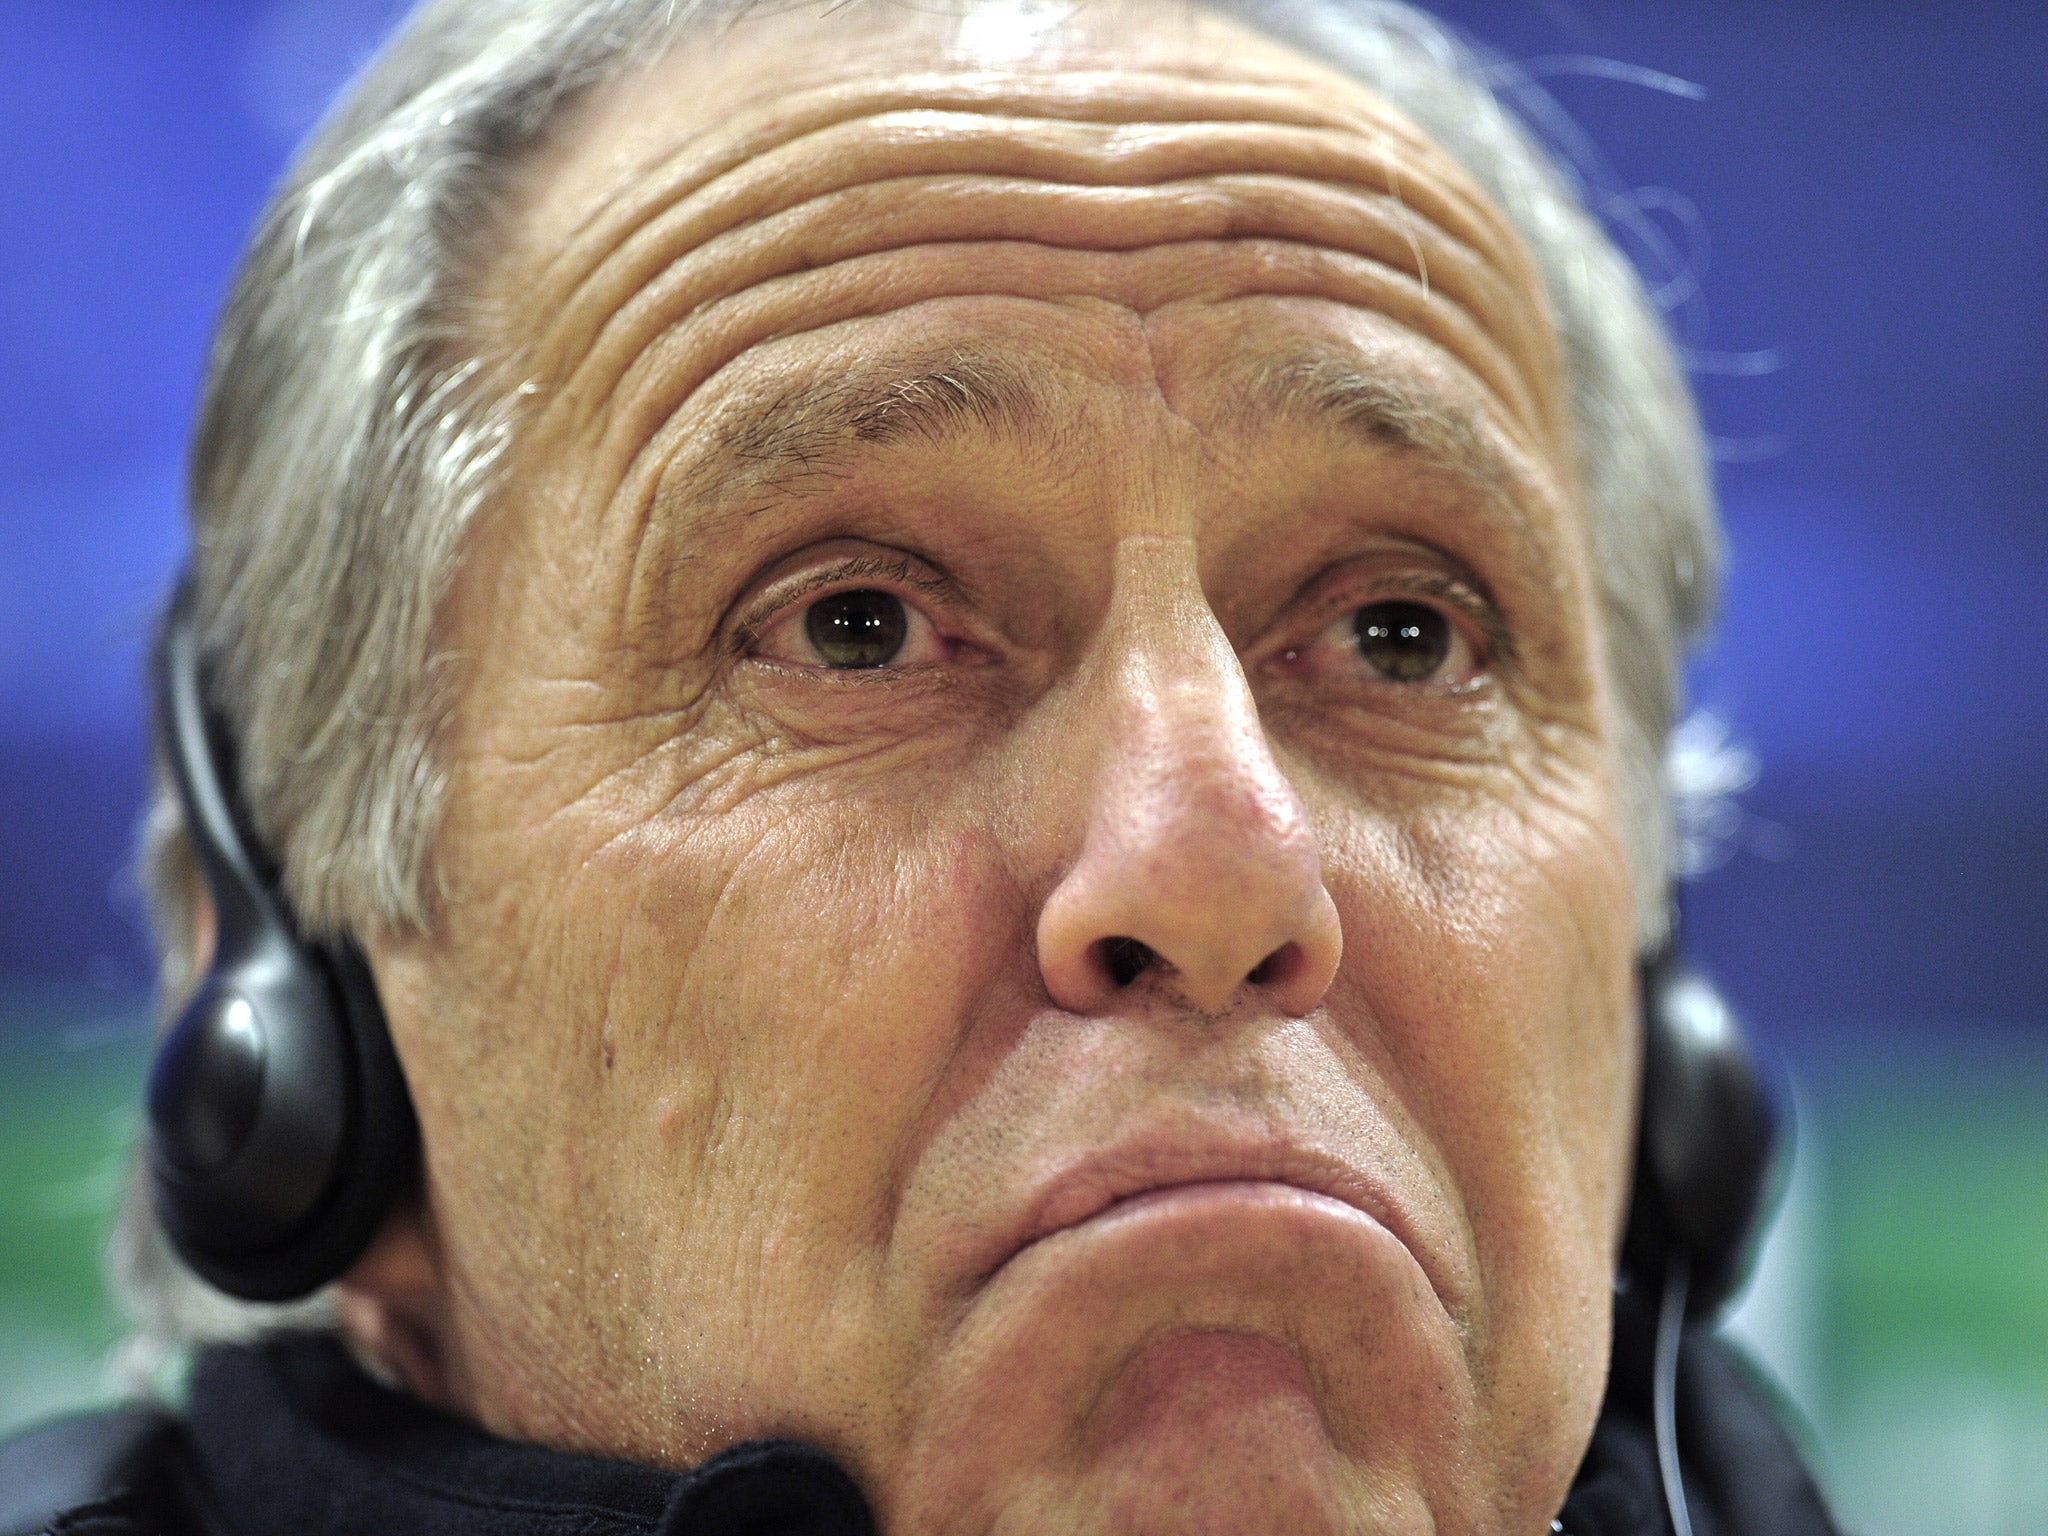 Montpellier manager Rene Girard said it was an 'absolute privilege' to be involved in Champions League football